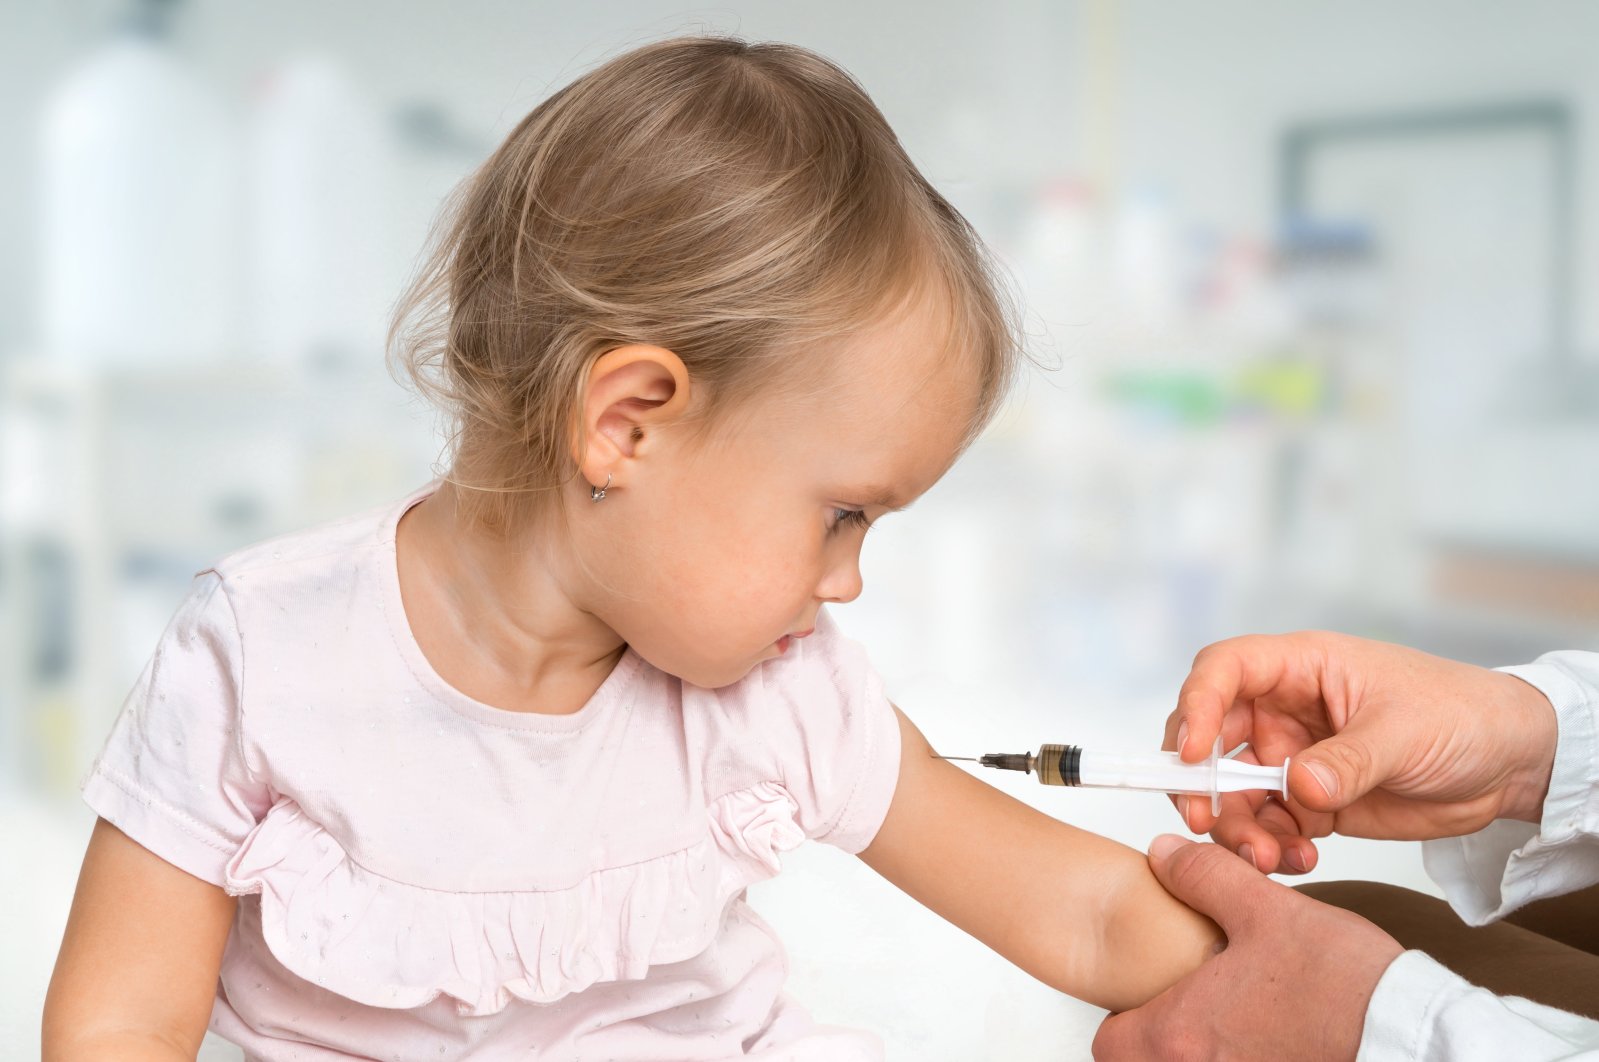 A pediatric doctor injects a dose of a vaccine into a child's shoulder. (Getty Images)